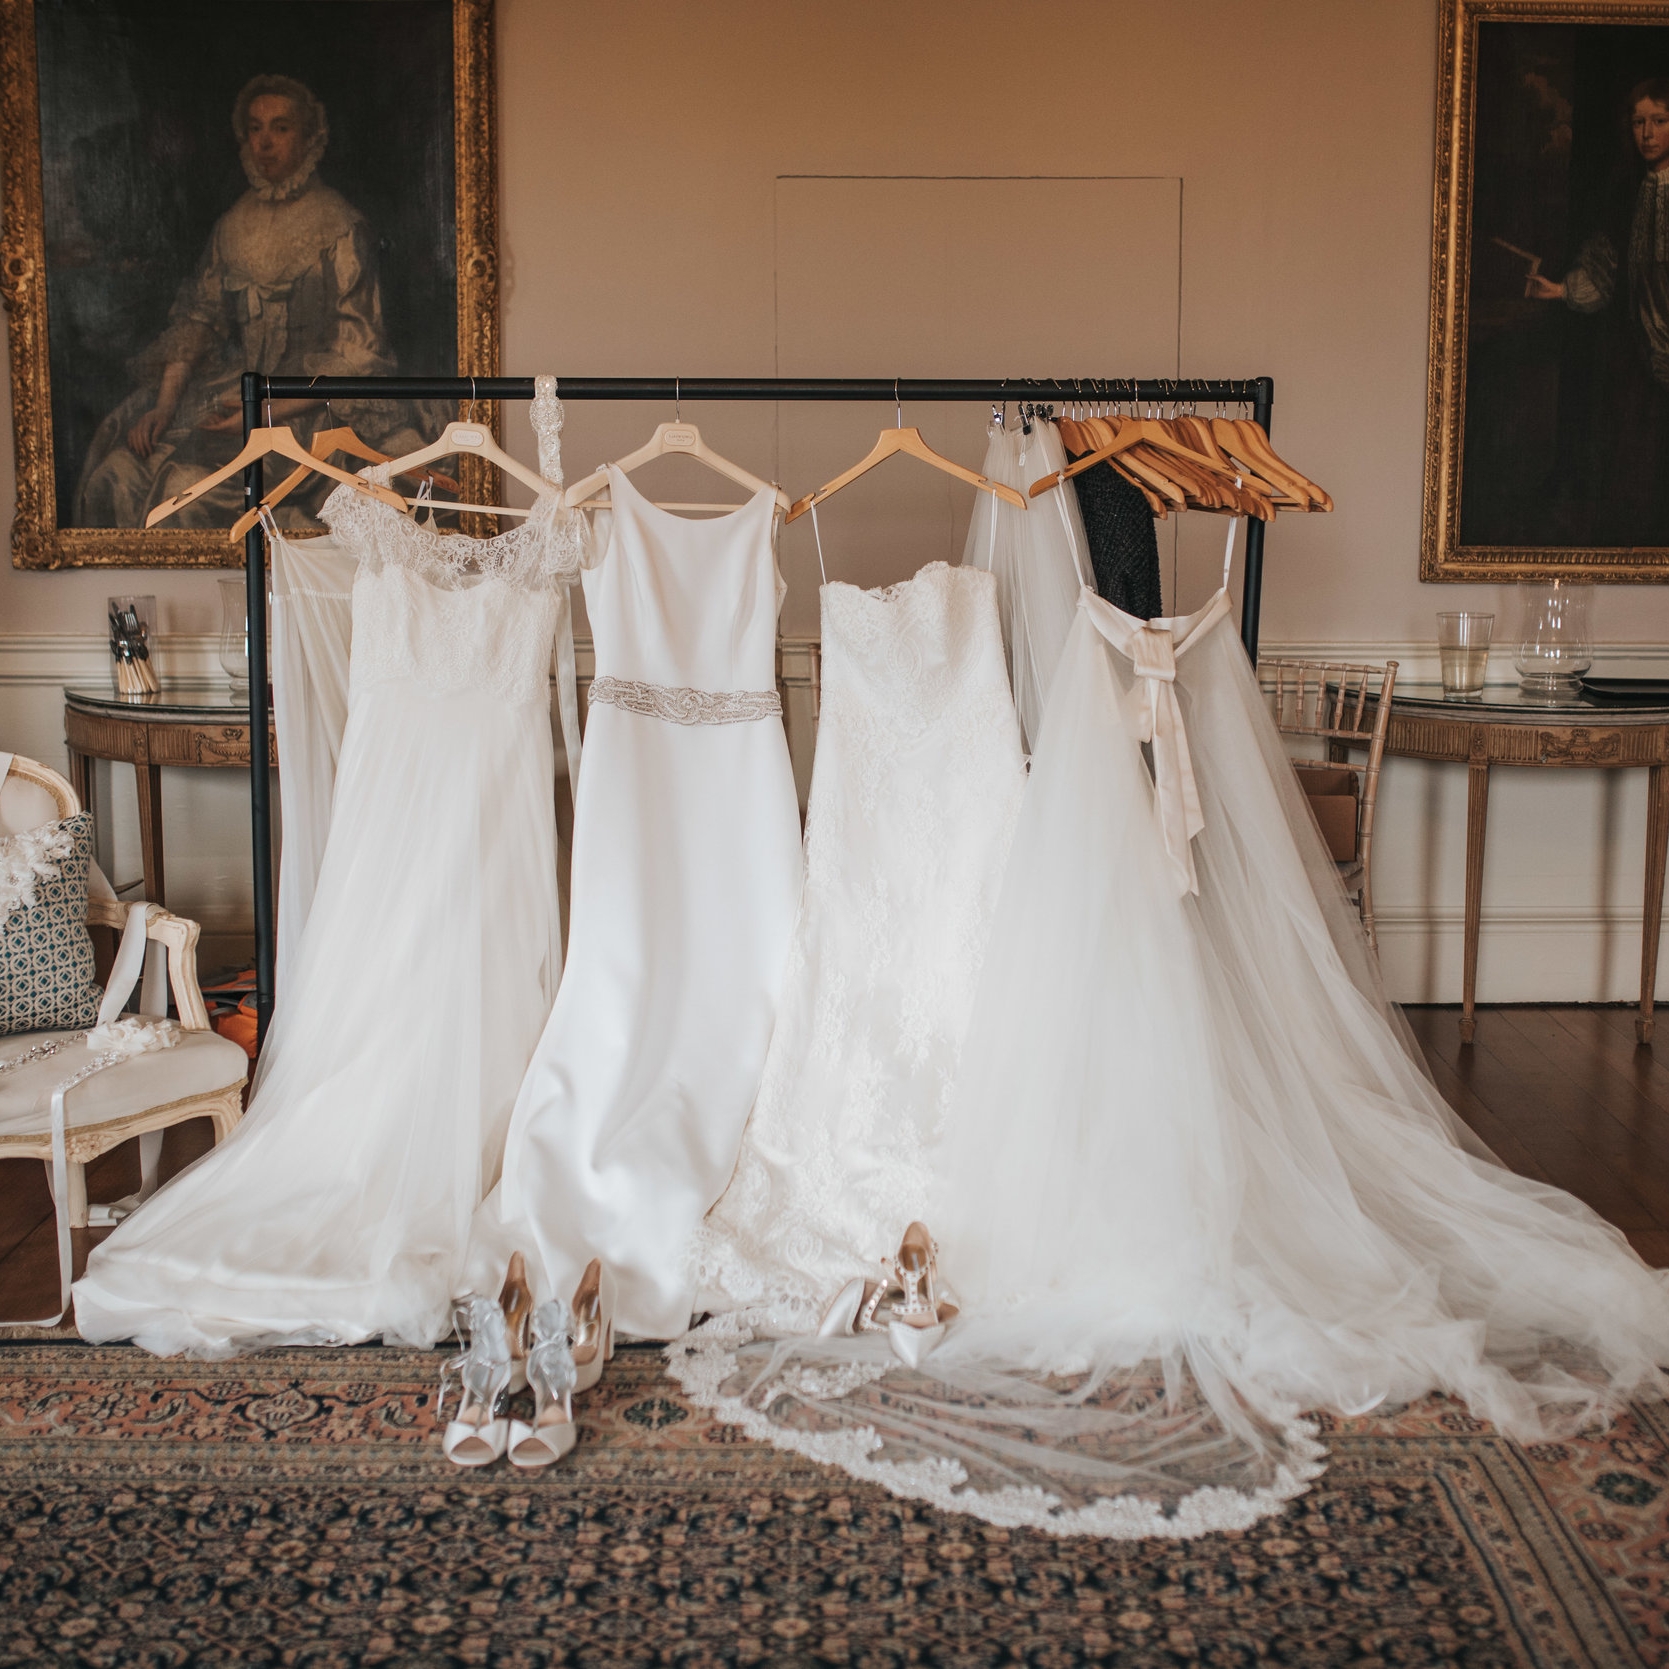 Beautiful Satin Wedding dresses laid out ready to put on draped over the back of a chair